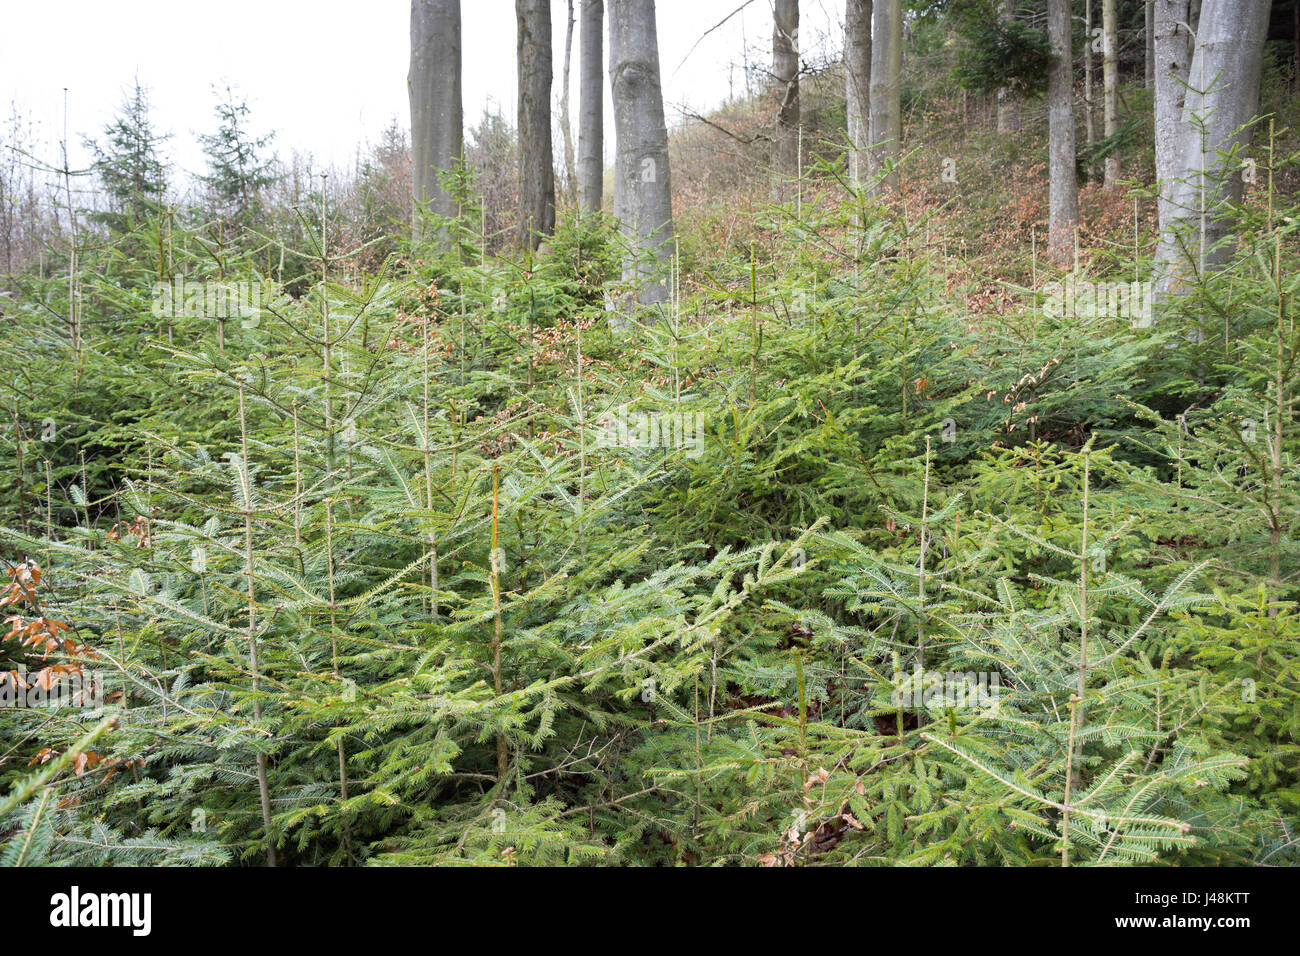 Natural regeneration of fir, spruce and beech under a canopy of overwood of beeches and firs in a mountainous forest in Styria, Austria. Stock Photo